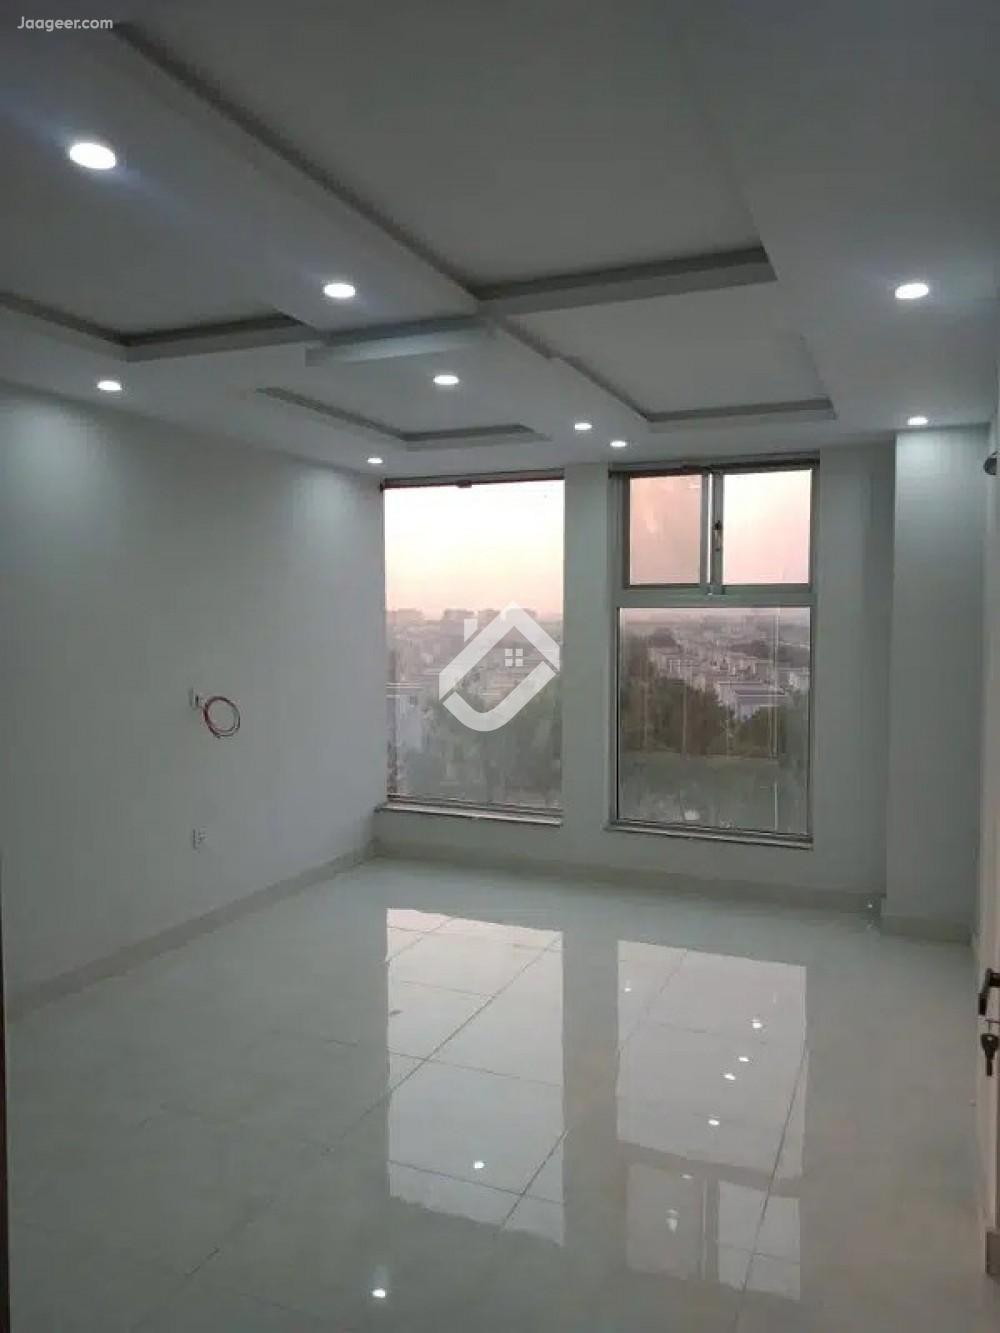 View  1 Bed Furnished Apartment For Rent In Bahria Town  in Bahria Town, Lahore